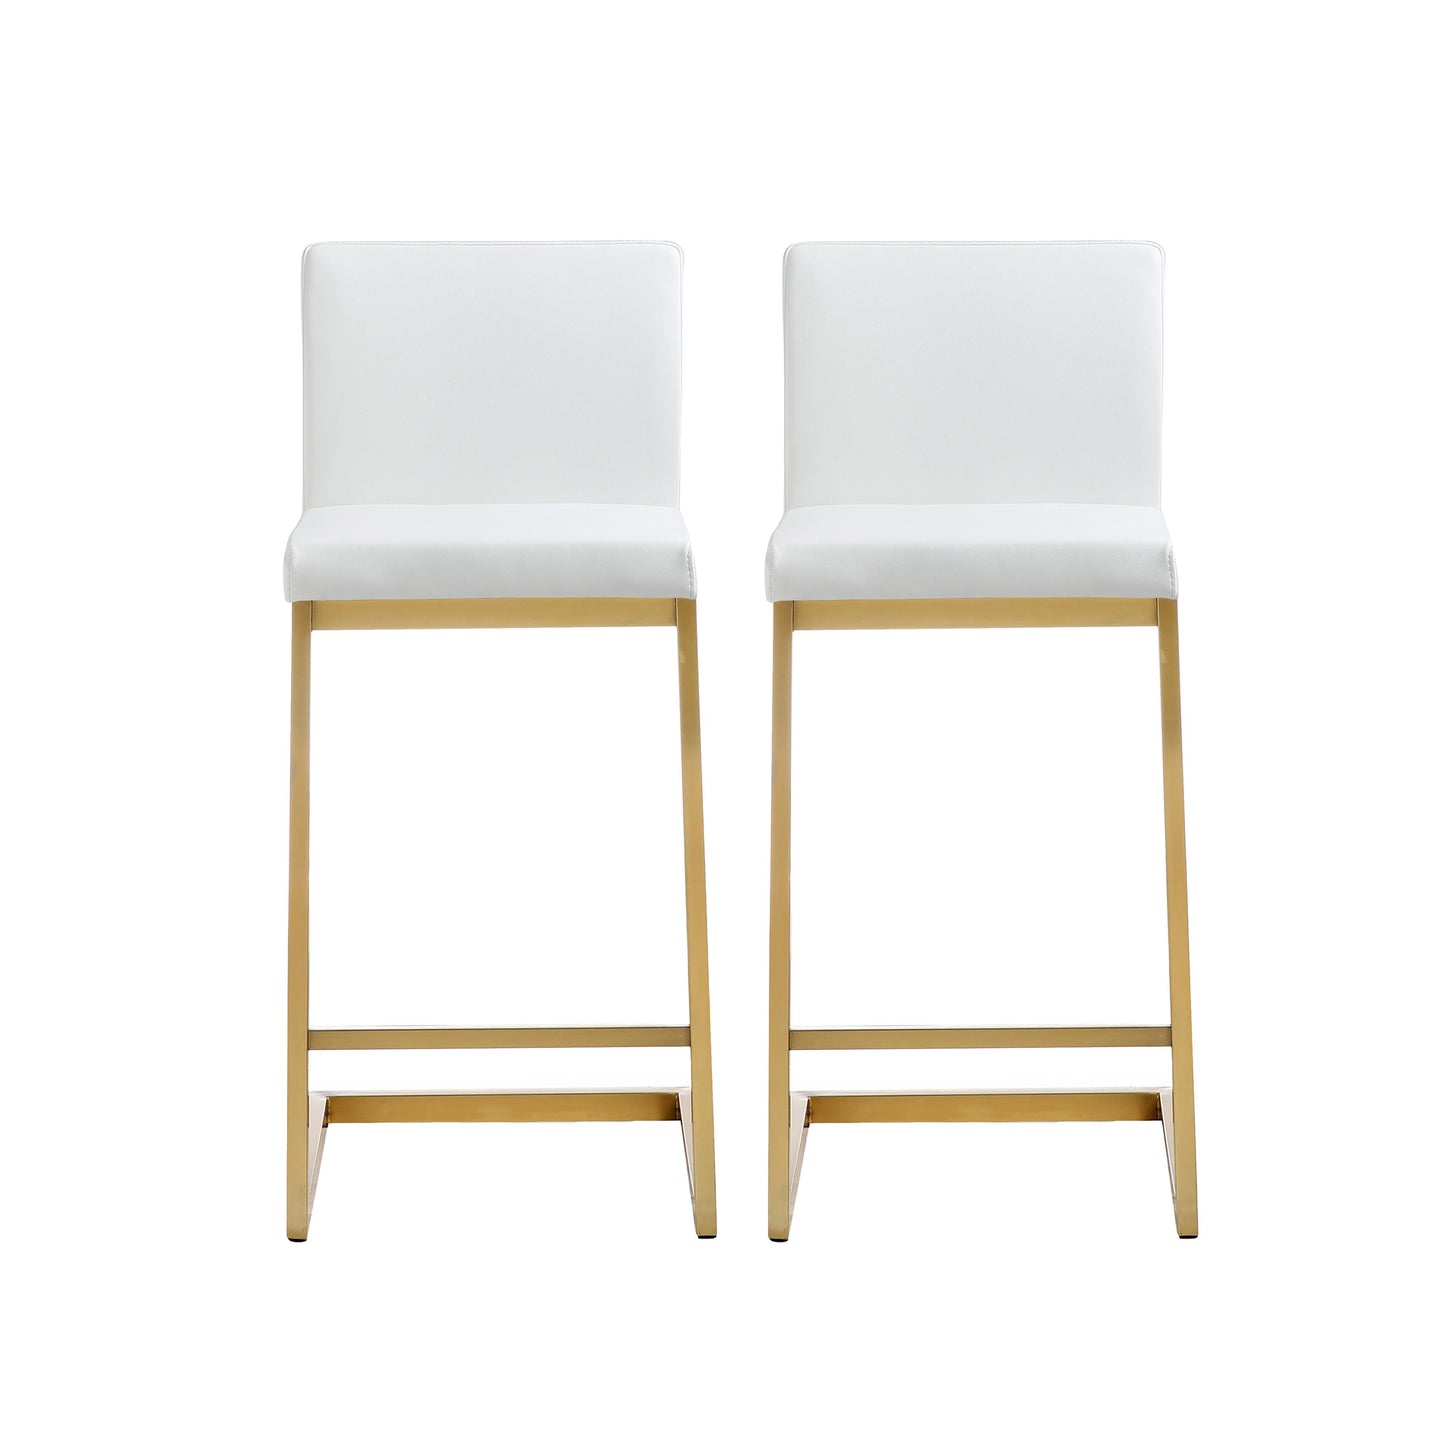 Tov Furniture Parma White Gold Steel Counter Stool Set of 2